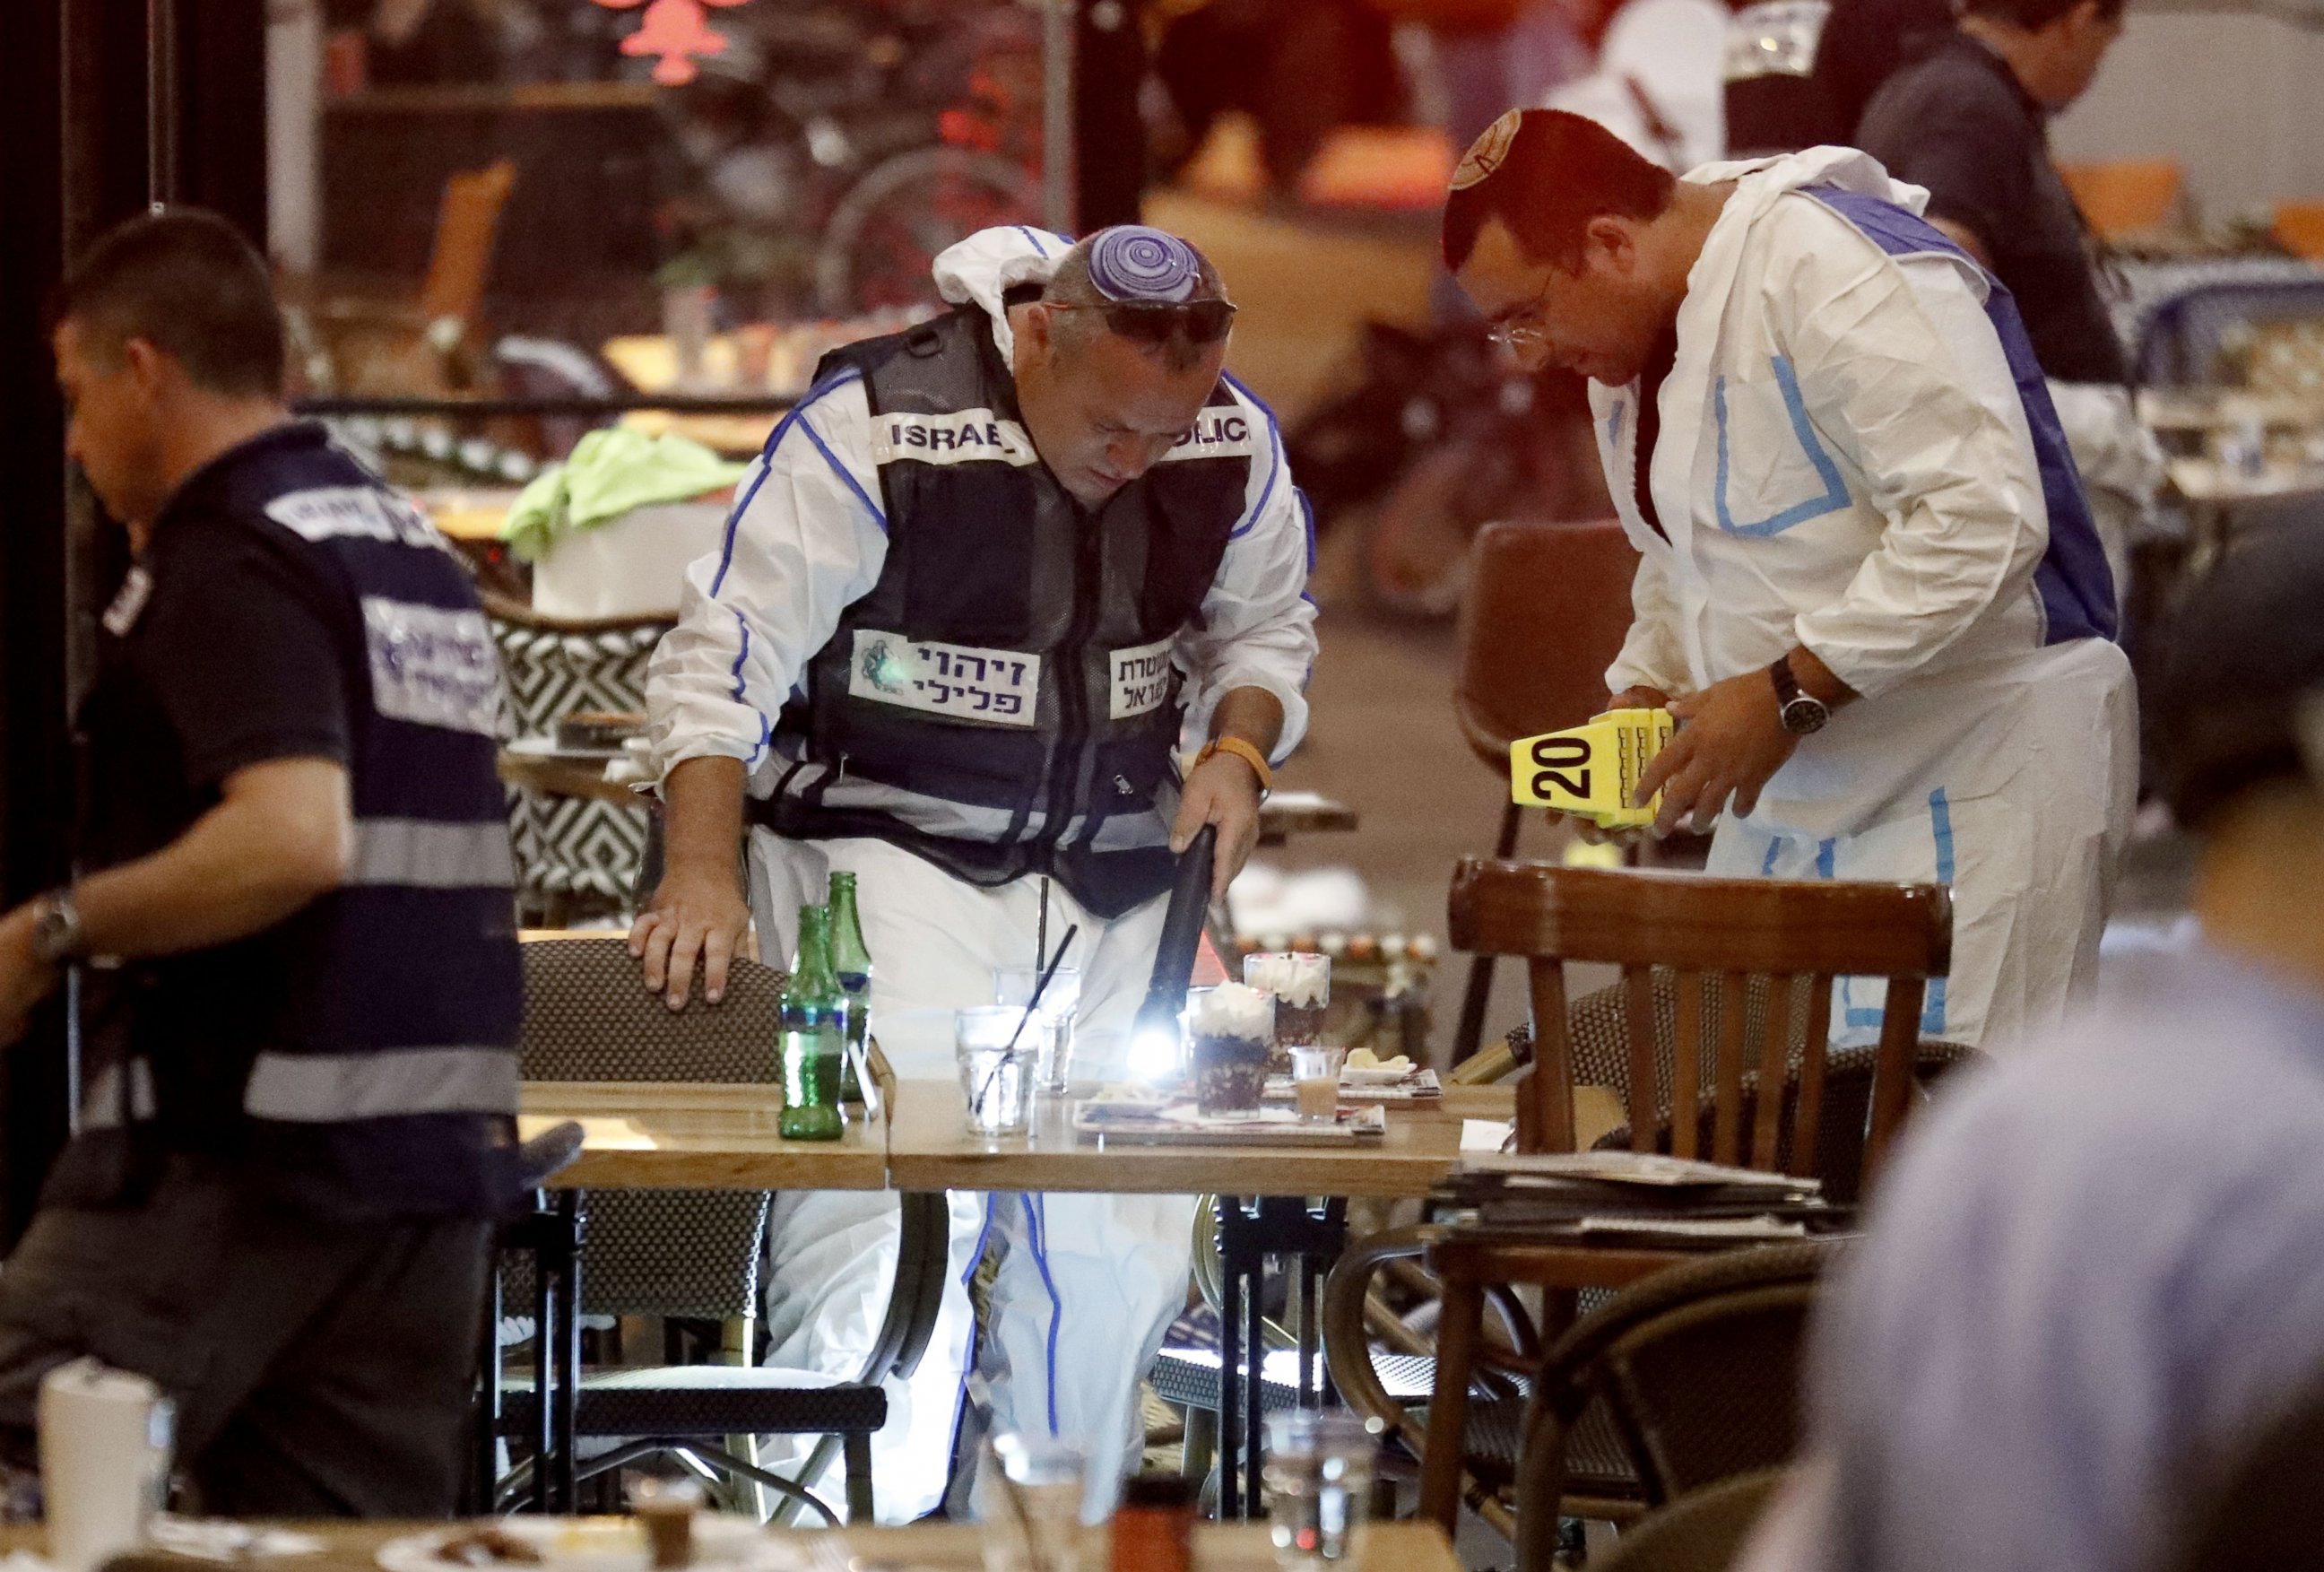 PHOTO: Israeli forensic police investigating the scene of a shooting at a shopping complex in the city of Tel Aviv on June 8, 2016. At least three people were killed and several wounded in the shooting spree, emergency services said. 